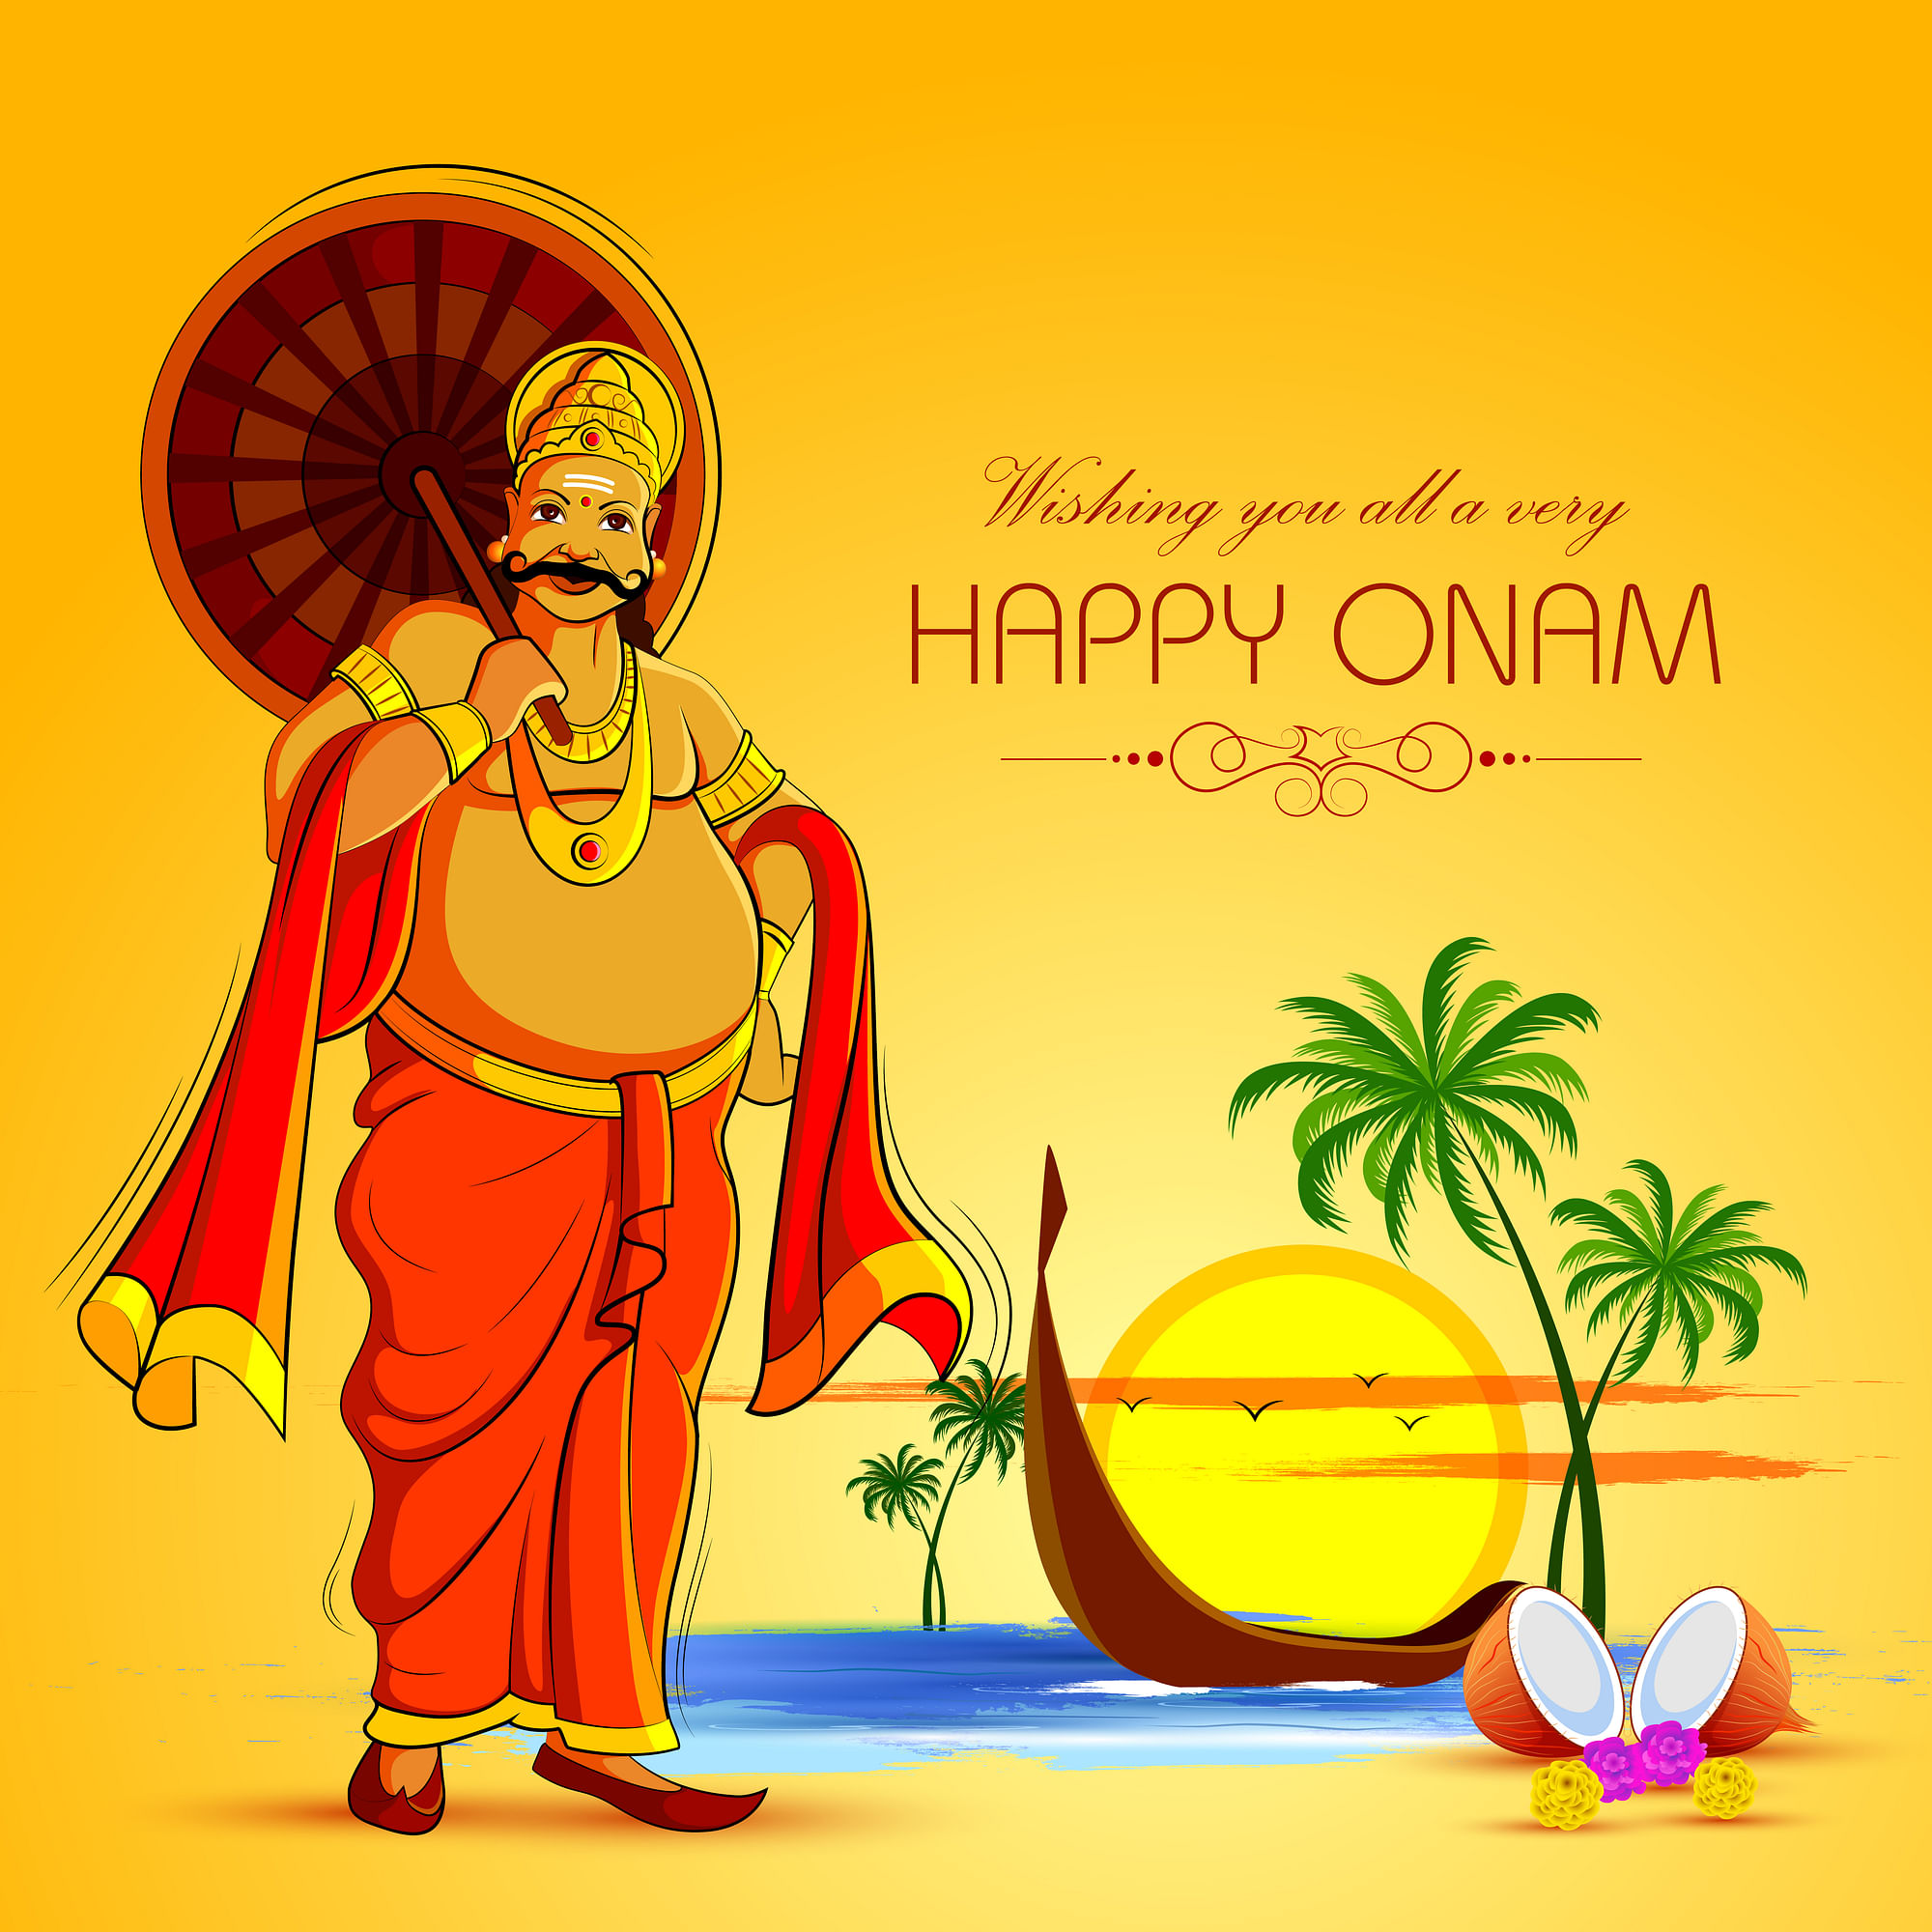 Onam 2019 Wishes In English Malayalam Tamil Happy Onam Festival Greetings Cards Images For Whatsapp Status Instagram Sms Fb Photos To Wish Kerala S Festival